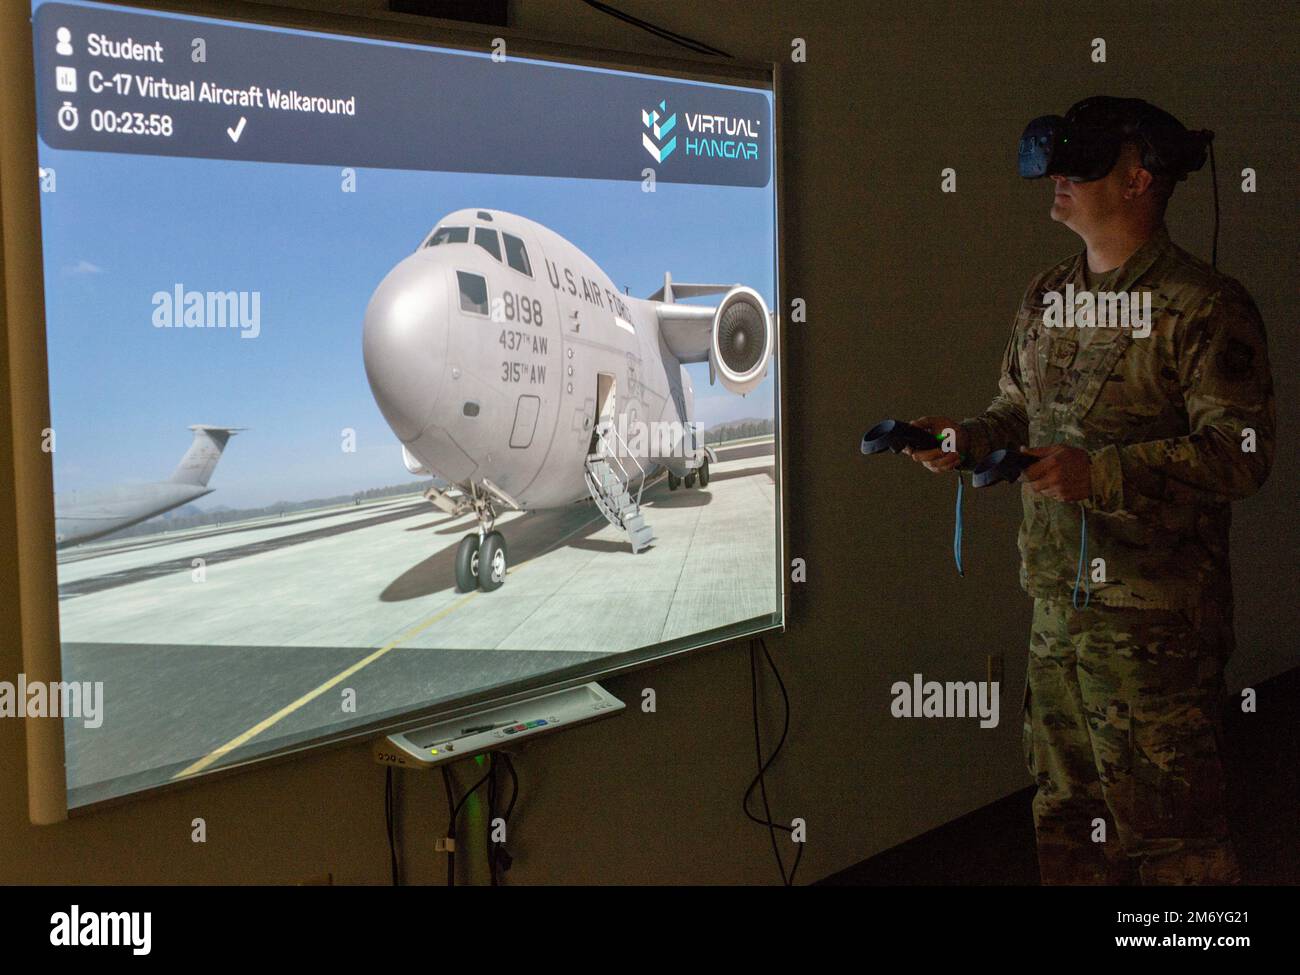 Staff Sgt. James Hart, 436th Aerial Port Squadron fleet services supervisor, walks around a C-17 Globemaster III using virtual reality goggles during a multi-capable Airmen training class at Dover Air Force Base, Delaware, March 29, 2022. Hart and other MCA students used VR goggles to familiarize themselves with C-17 and C-5M Super Galaxy aircraft by performing a virtual walkaround. Stock Photo